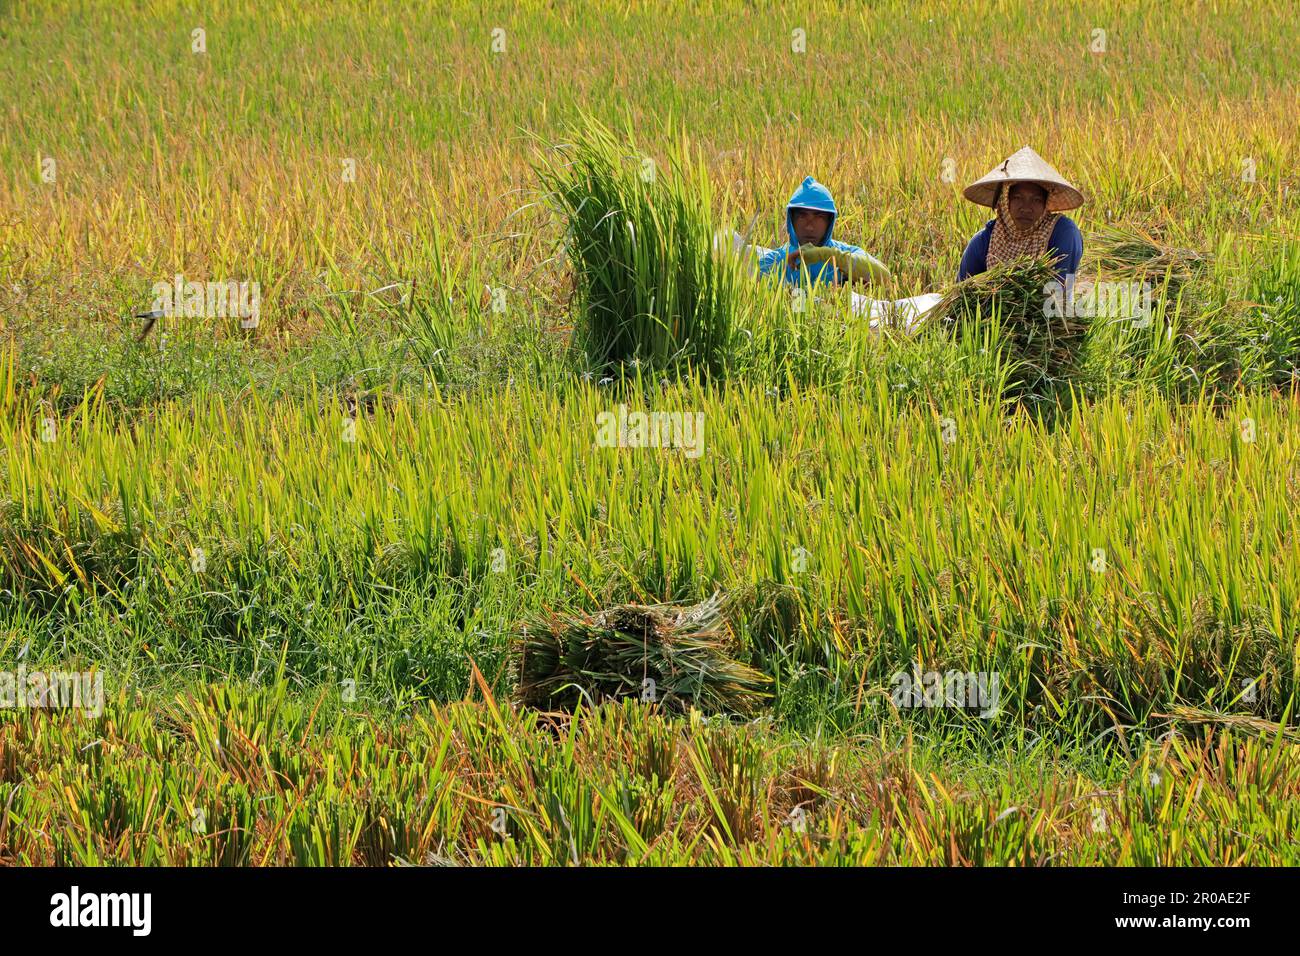 Ubud, Bali, Indonesia - September 6, 2019: Local farmers working in a rural rice paddy- rice holds the central place in Indonesian culture and cuisine Stock Photo